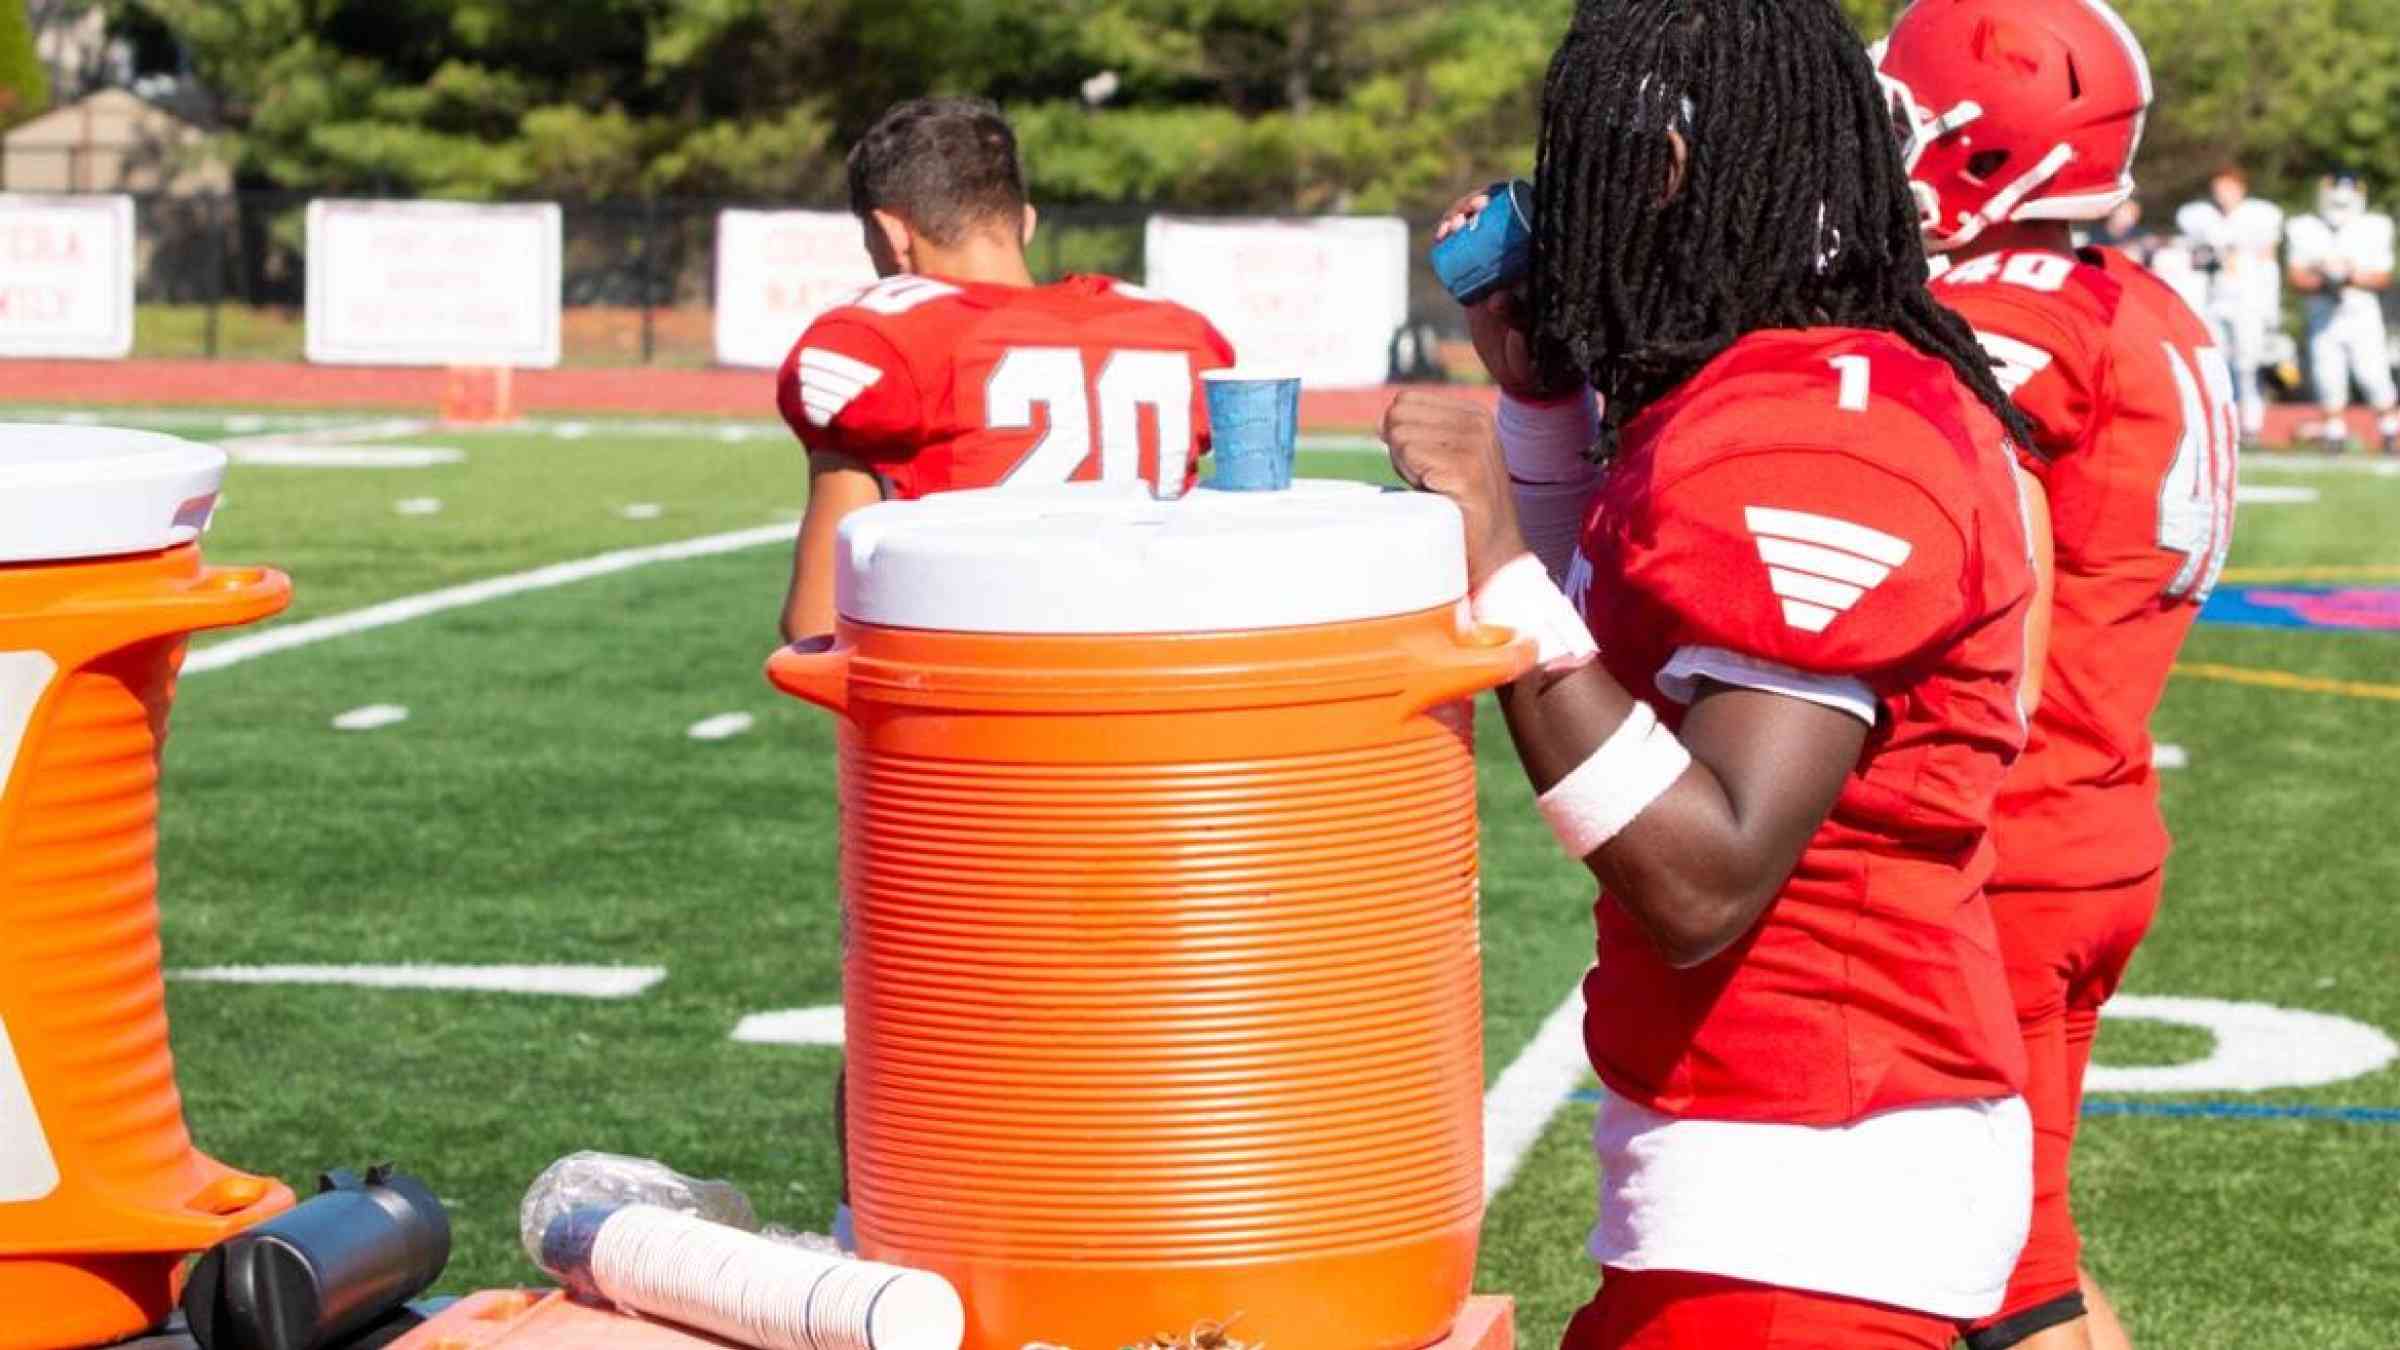 A football player takes a water break in between matches